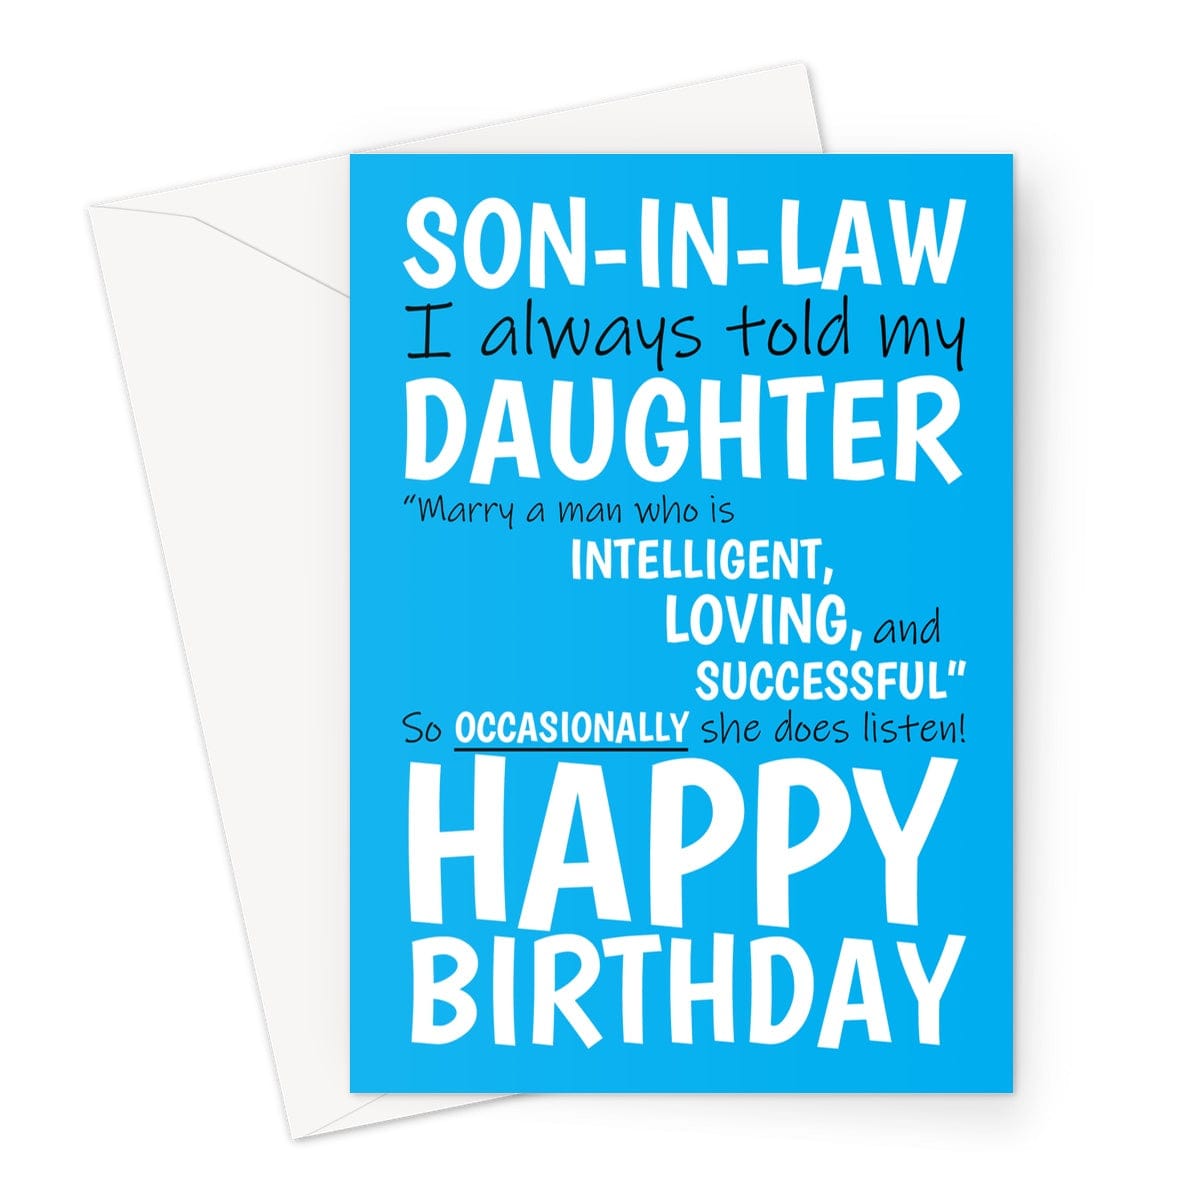 Happy Birthday Card For Son-in-law - My Daughter Does Listen - A5 ...